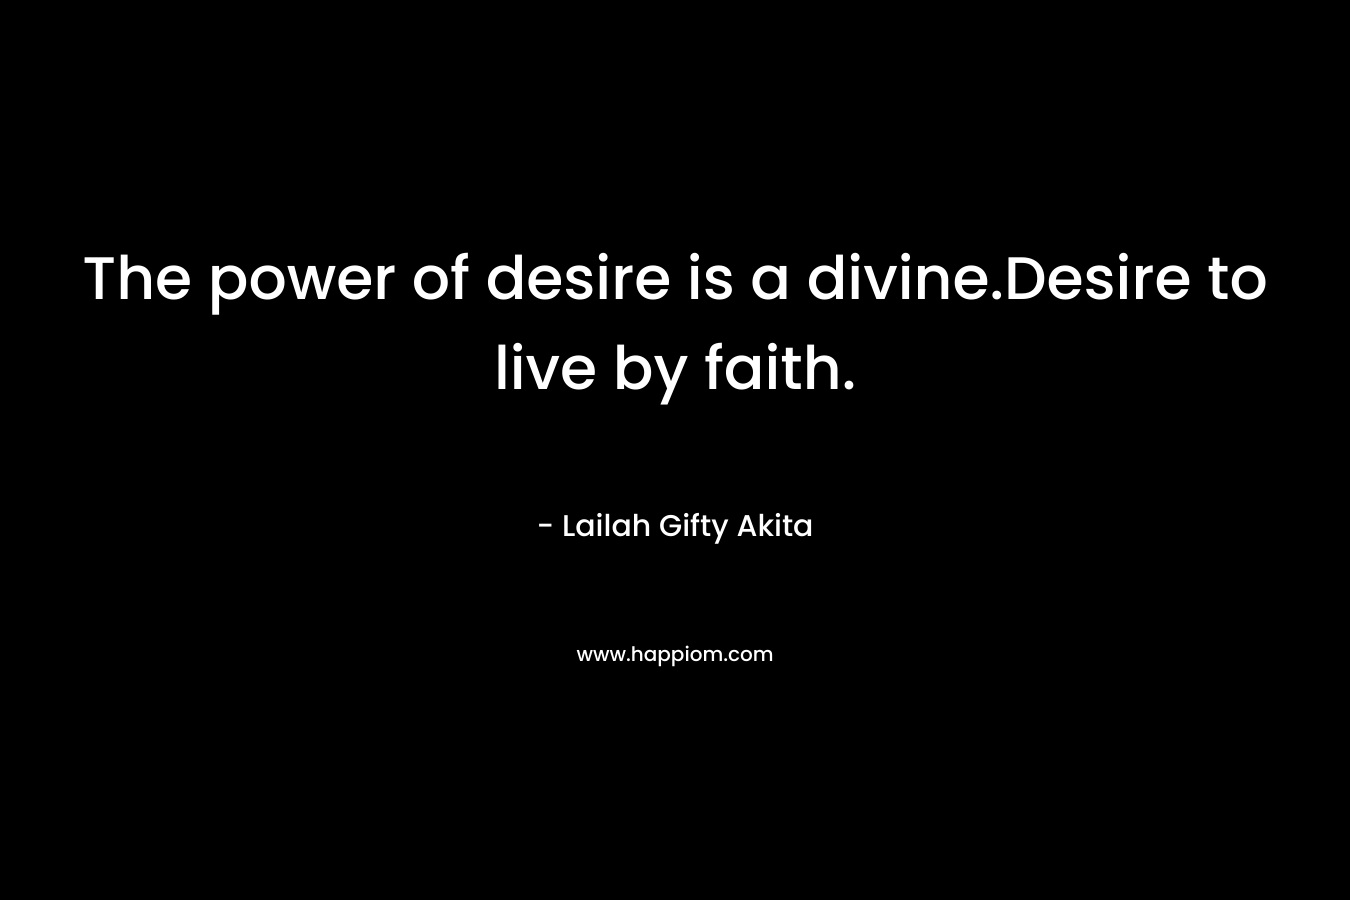 The power of desire is a divine.Desire to live by faith.